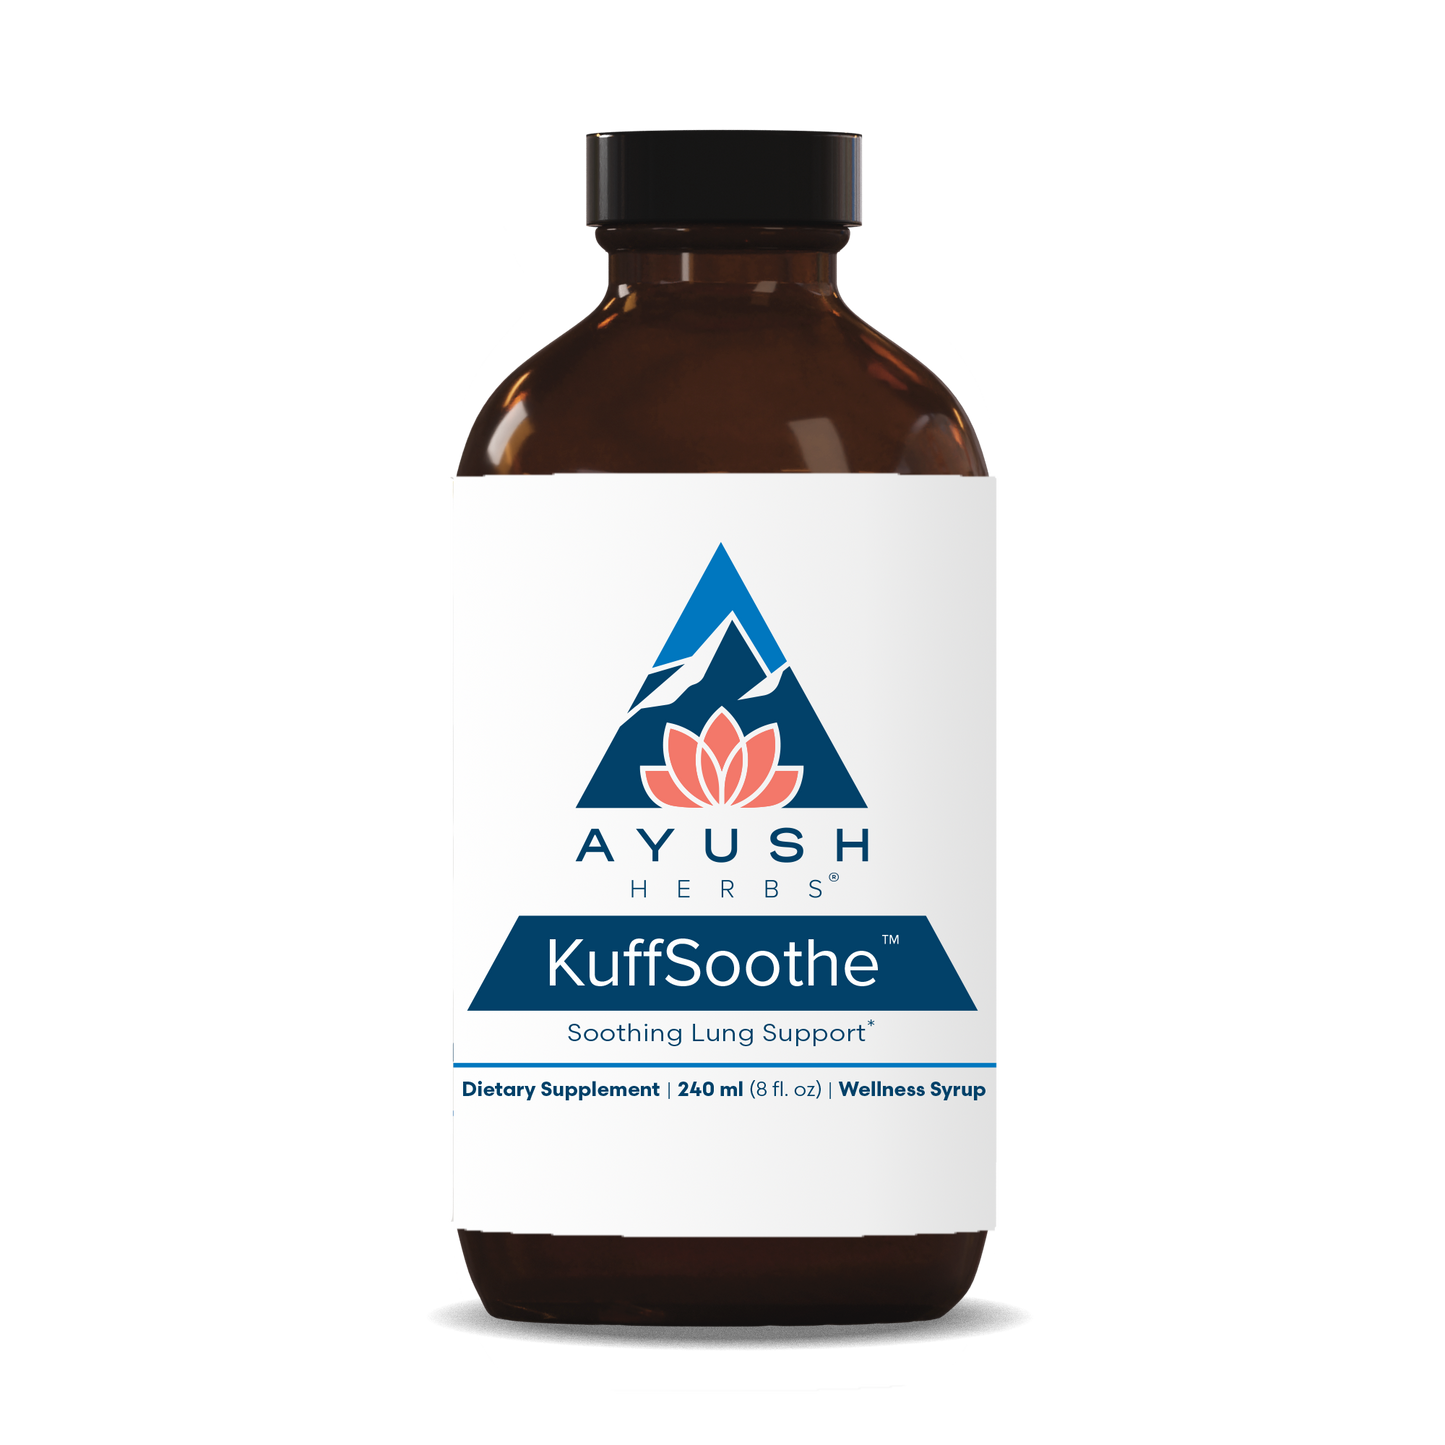 https://cdn.shopify.com/s/files/1/0560/4602/6829/files/Kuffsoothe_Front_1445x.png?v=1698354332